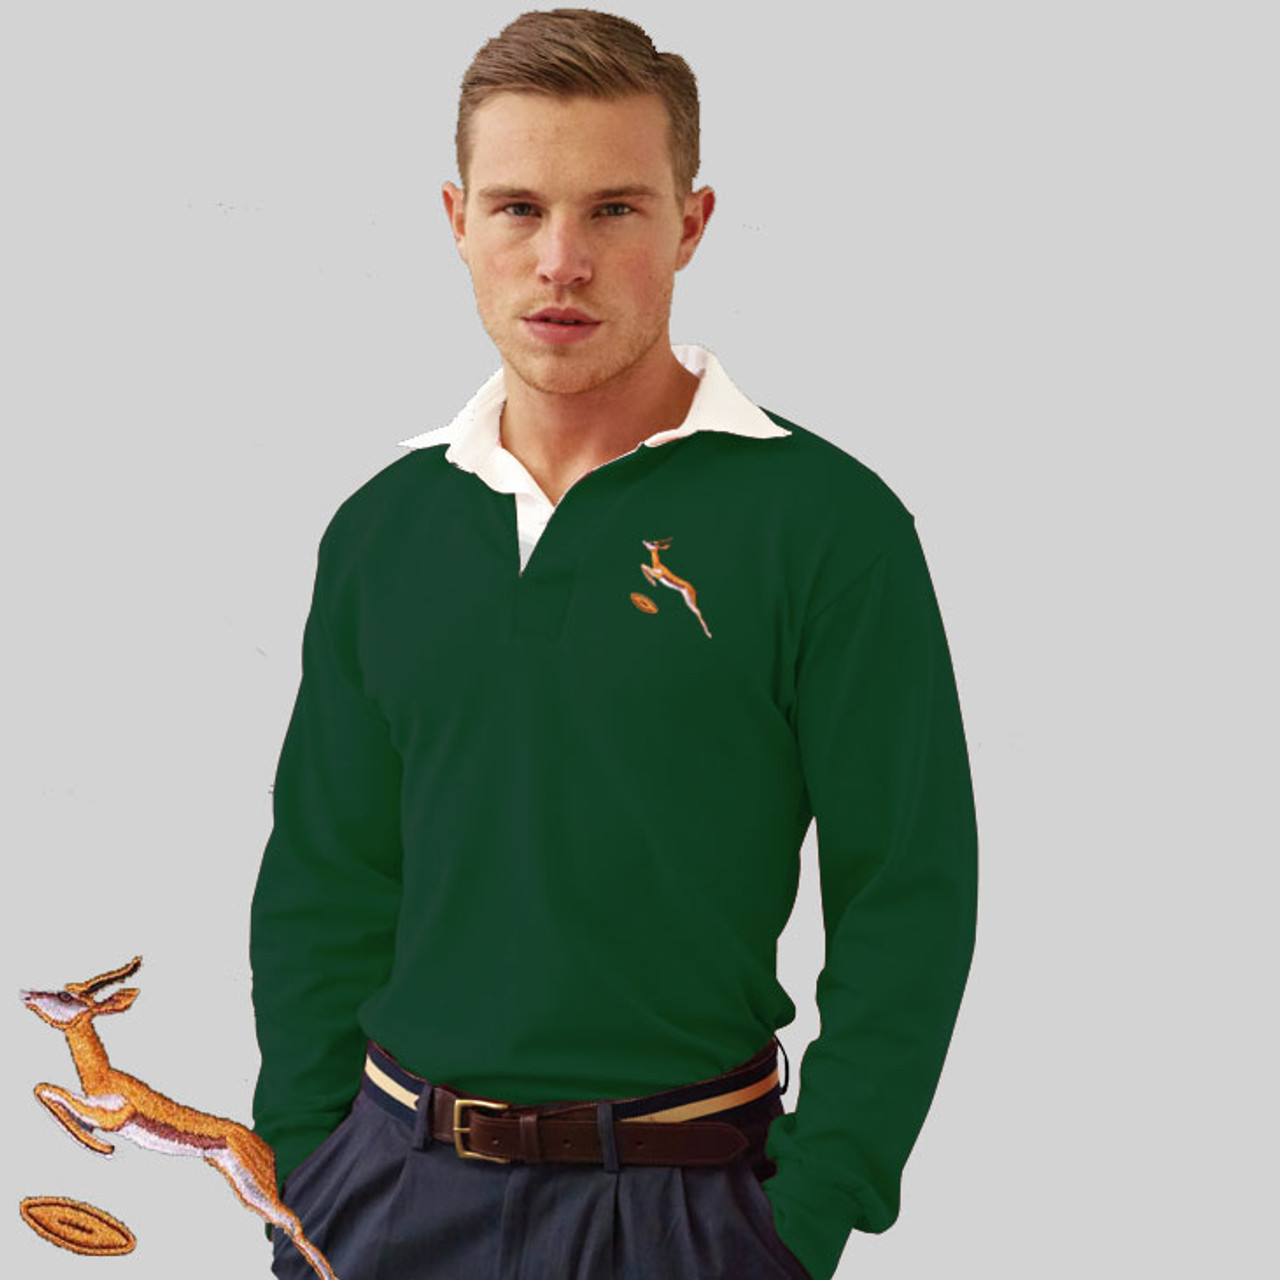 south africa rugby jersey long sleeve